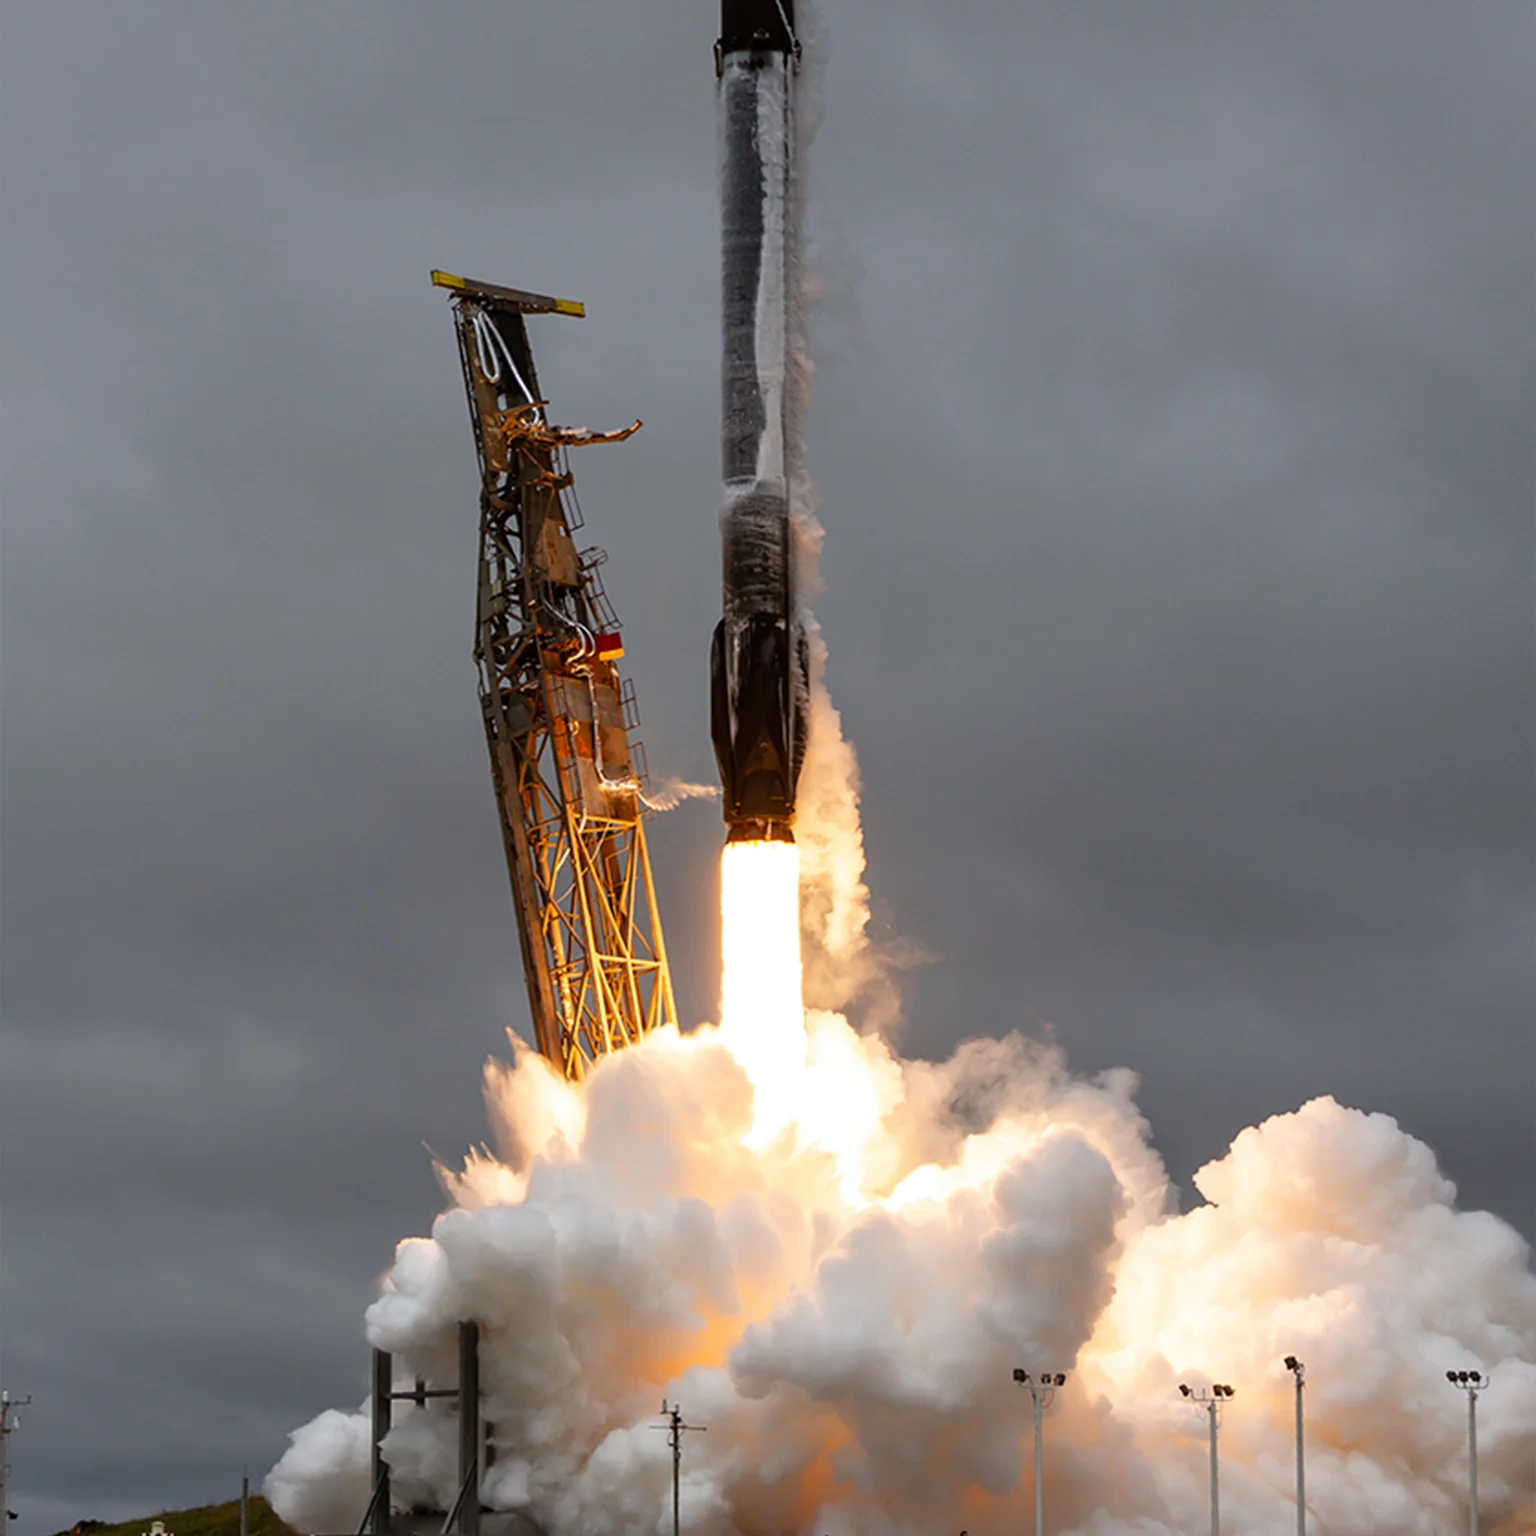 Rocket takes off from launchpad